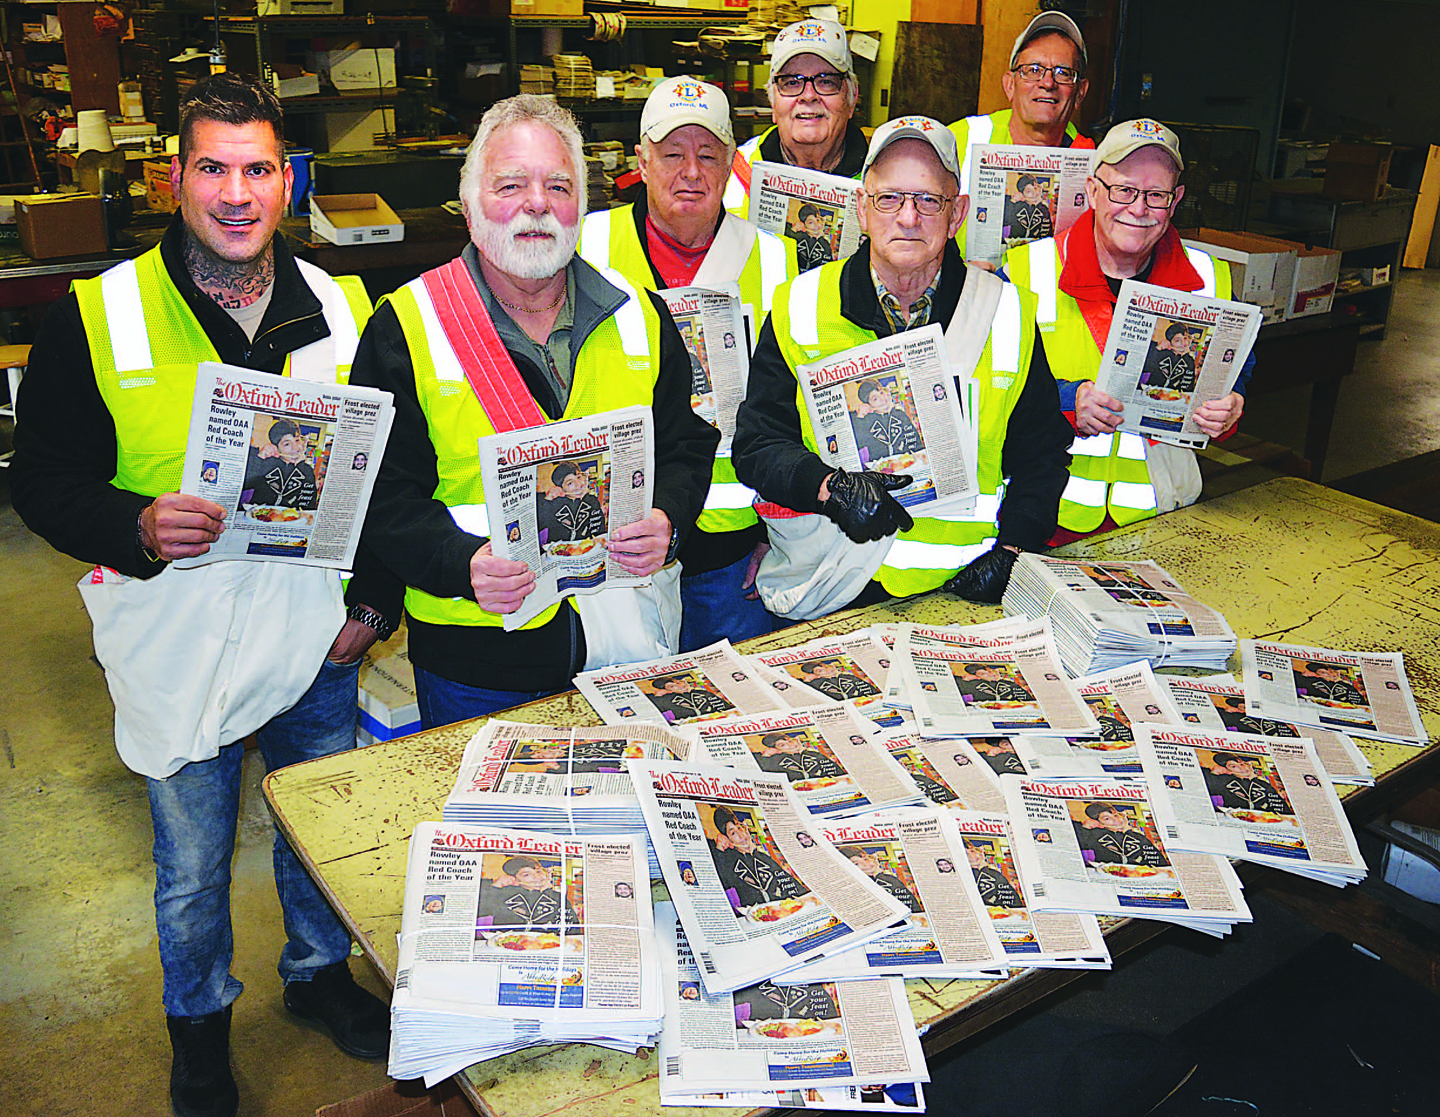 Members of the Oxford Lions Club will be on the street from Thursday, Nov. 29 to Saturday, Dec. 1 selling Goodfellow newspapers to raise money to fill Christmas baskets with food, clothes and toys for local folks in need. Photo by C.J. Carnacchio.